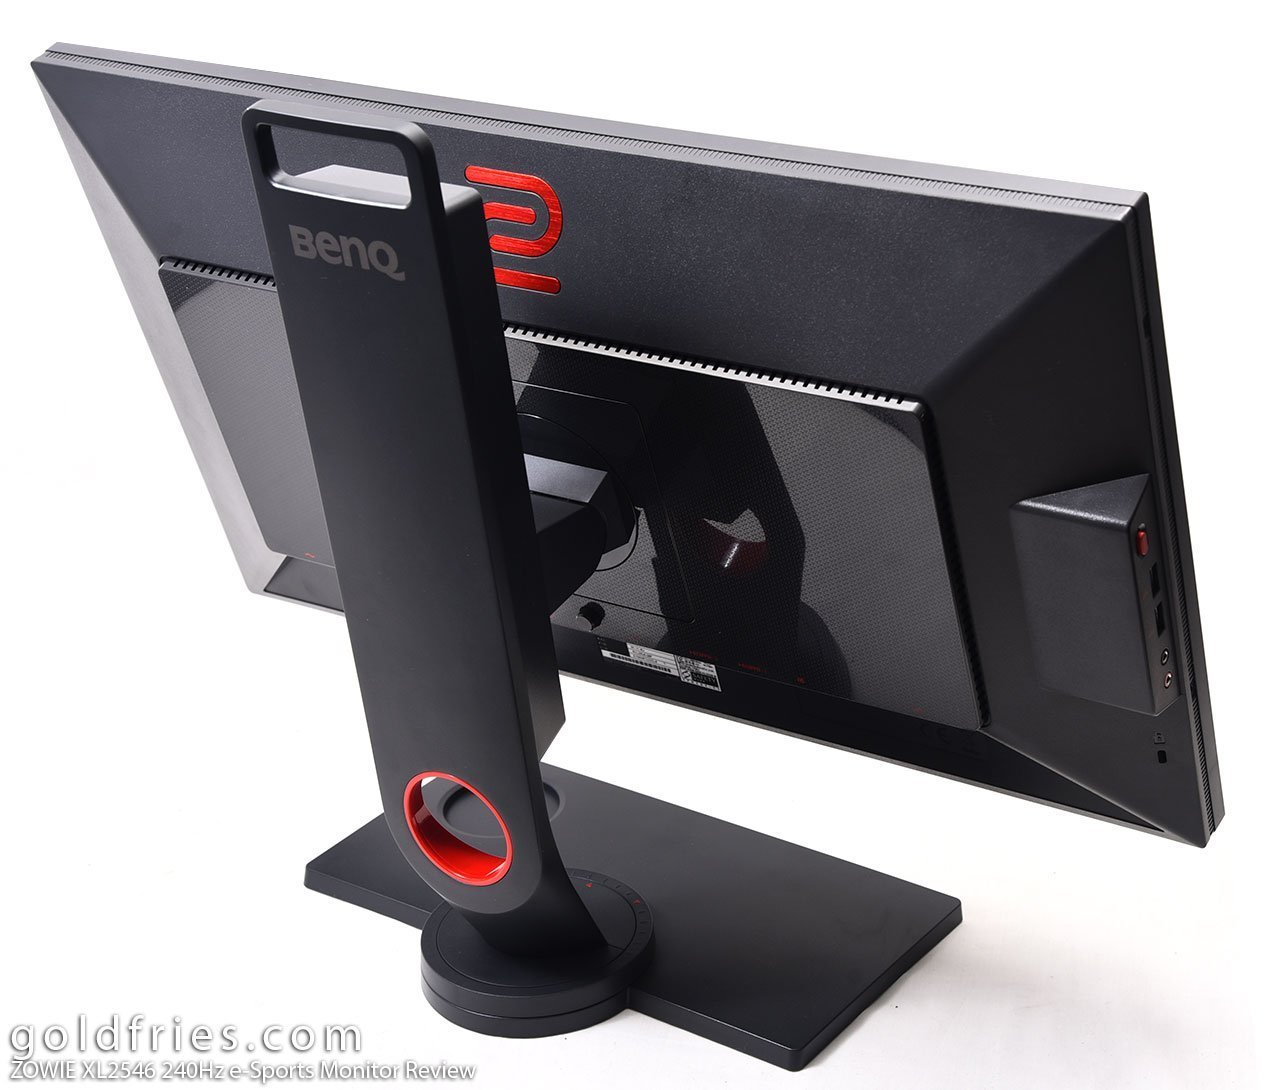 ZOWIE XL2546 240Hz e-Sports Monitor Review